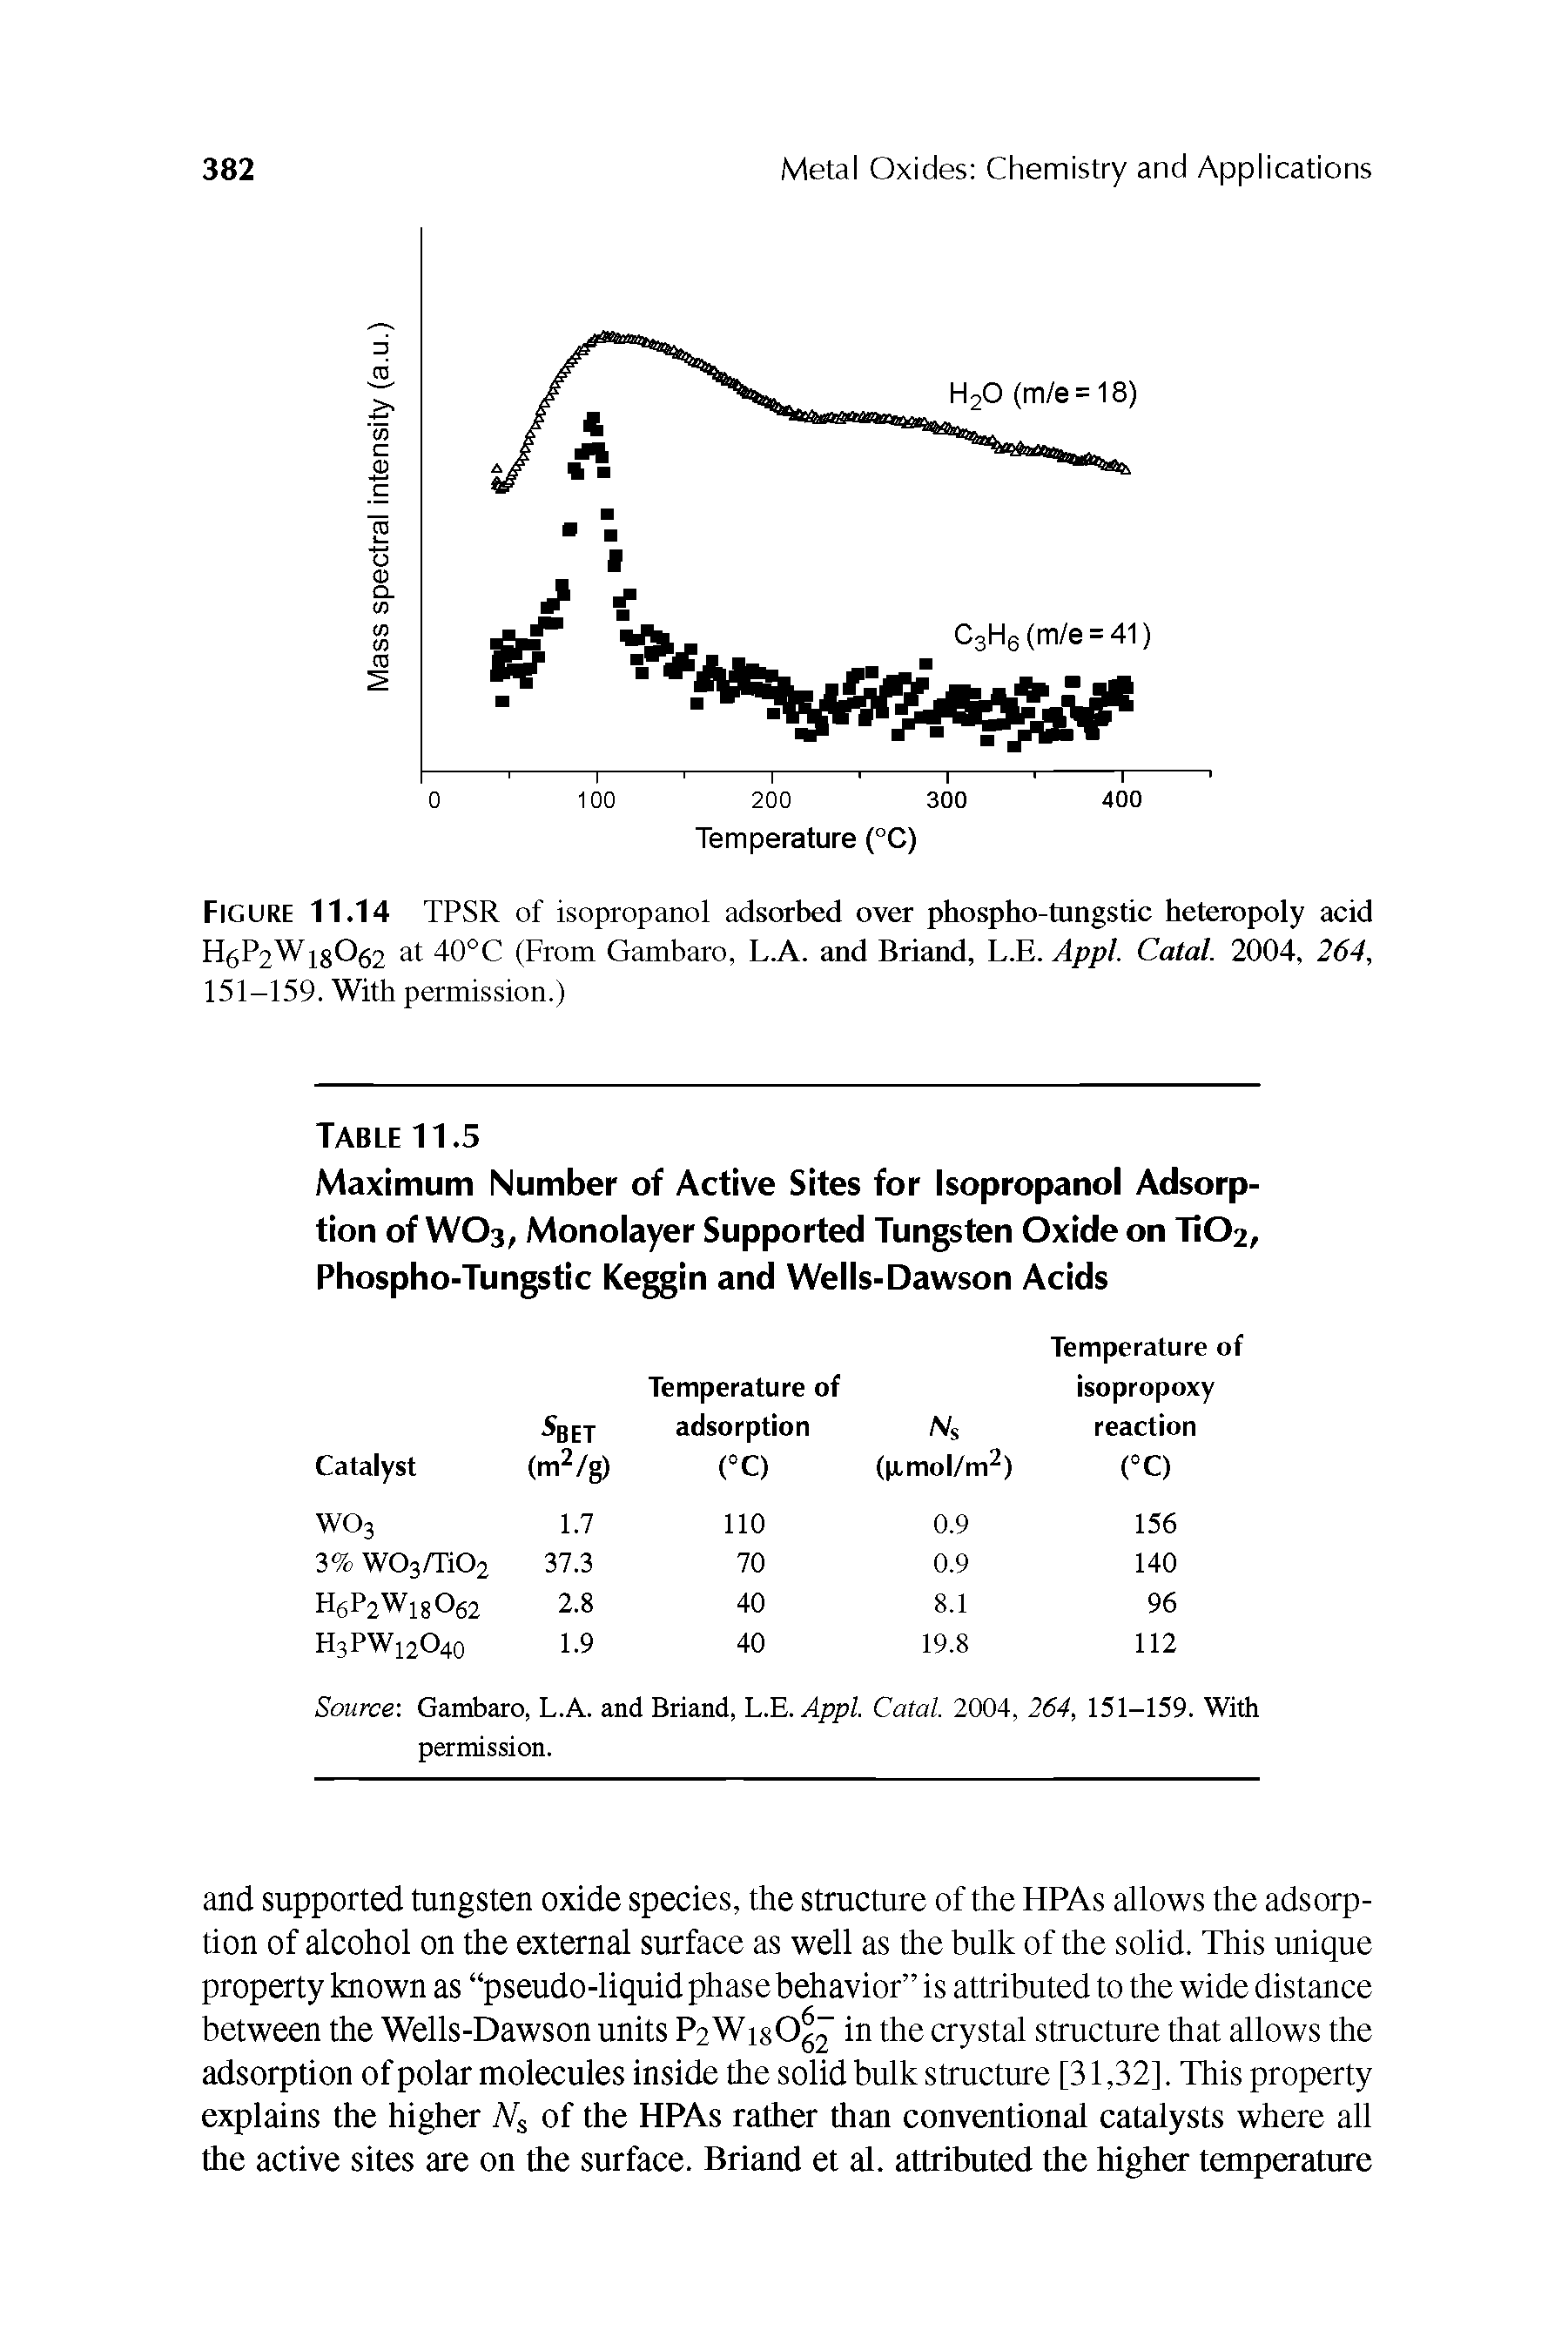 Figure 11.14 TPSR of isopropanol adsorbed over phospho-tungstic heteropoly acid H6P2W13O62 at 40 C (From Gambaro, L.A. and Briand, h.E.Appl. Catal. 2004, 264, 151-159. With permission.)...